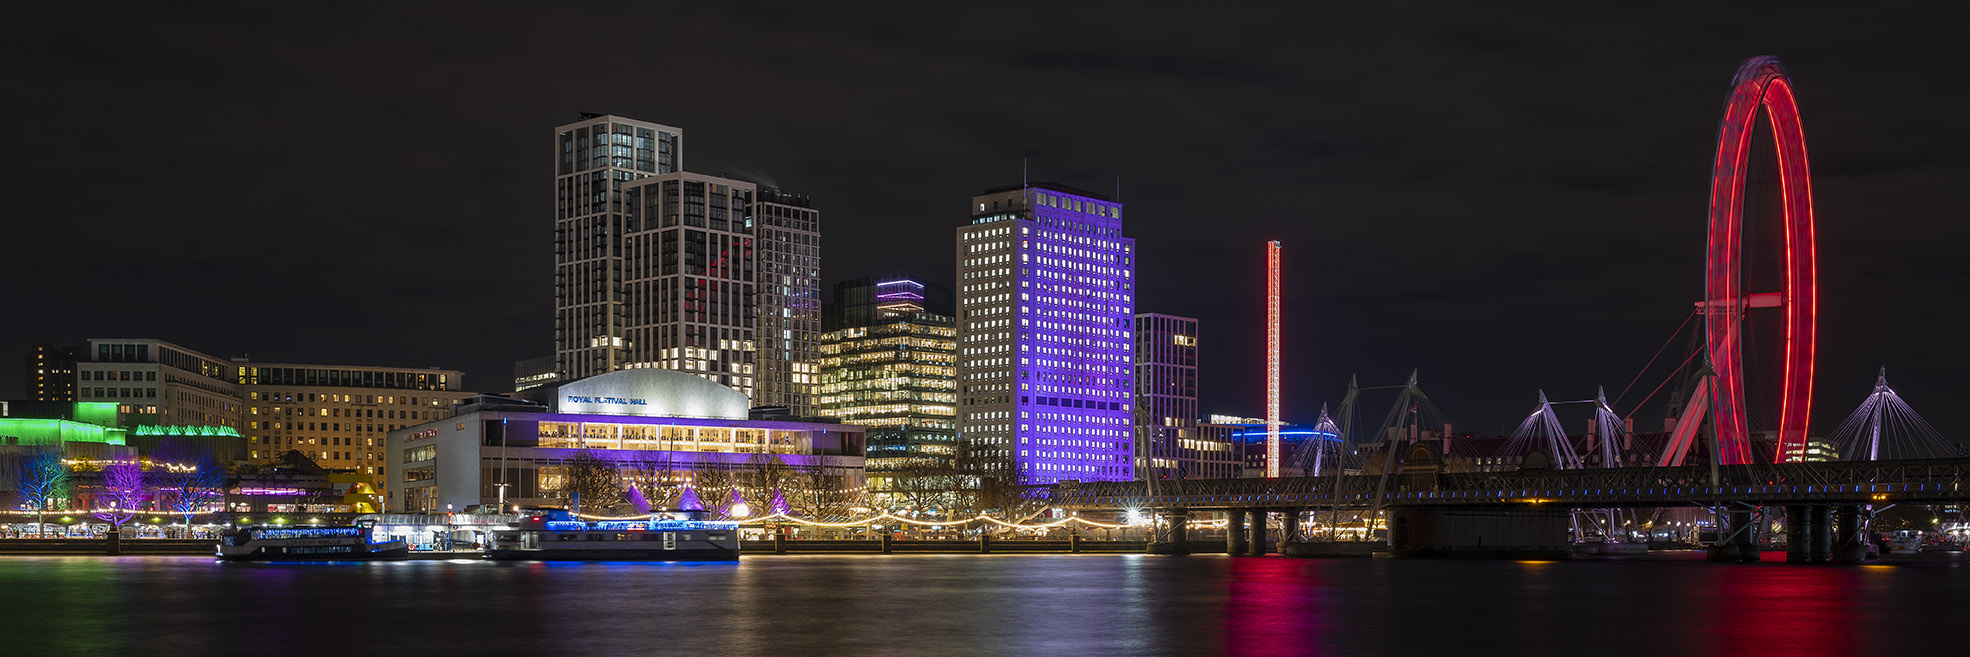 Panoramic image of London Skyline at night in glorious colour